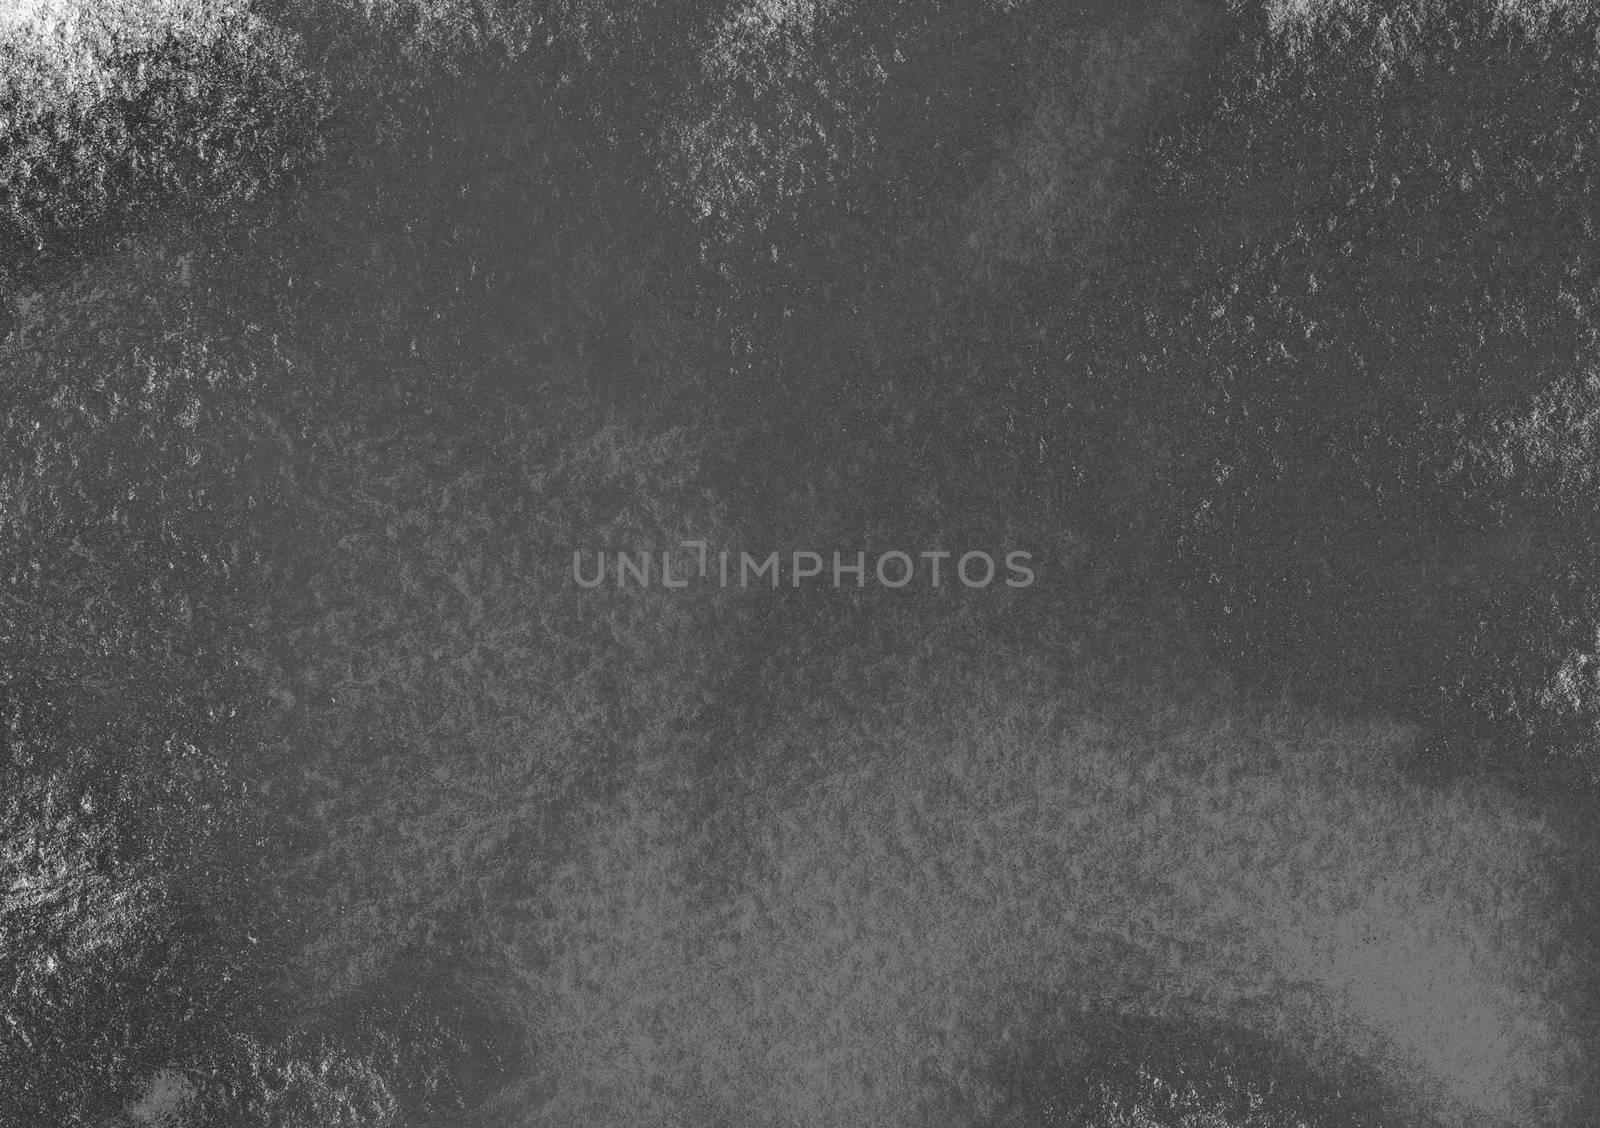 Monochrome dark paper texture. Grunge pattern. Raster illustration with space for text, for media advertising website fashion concept design, banner by LanaLeta